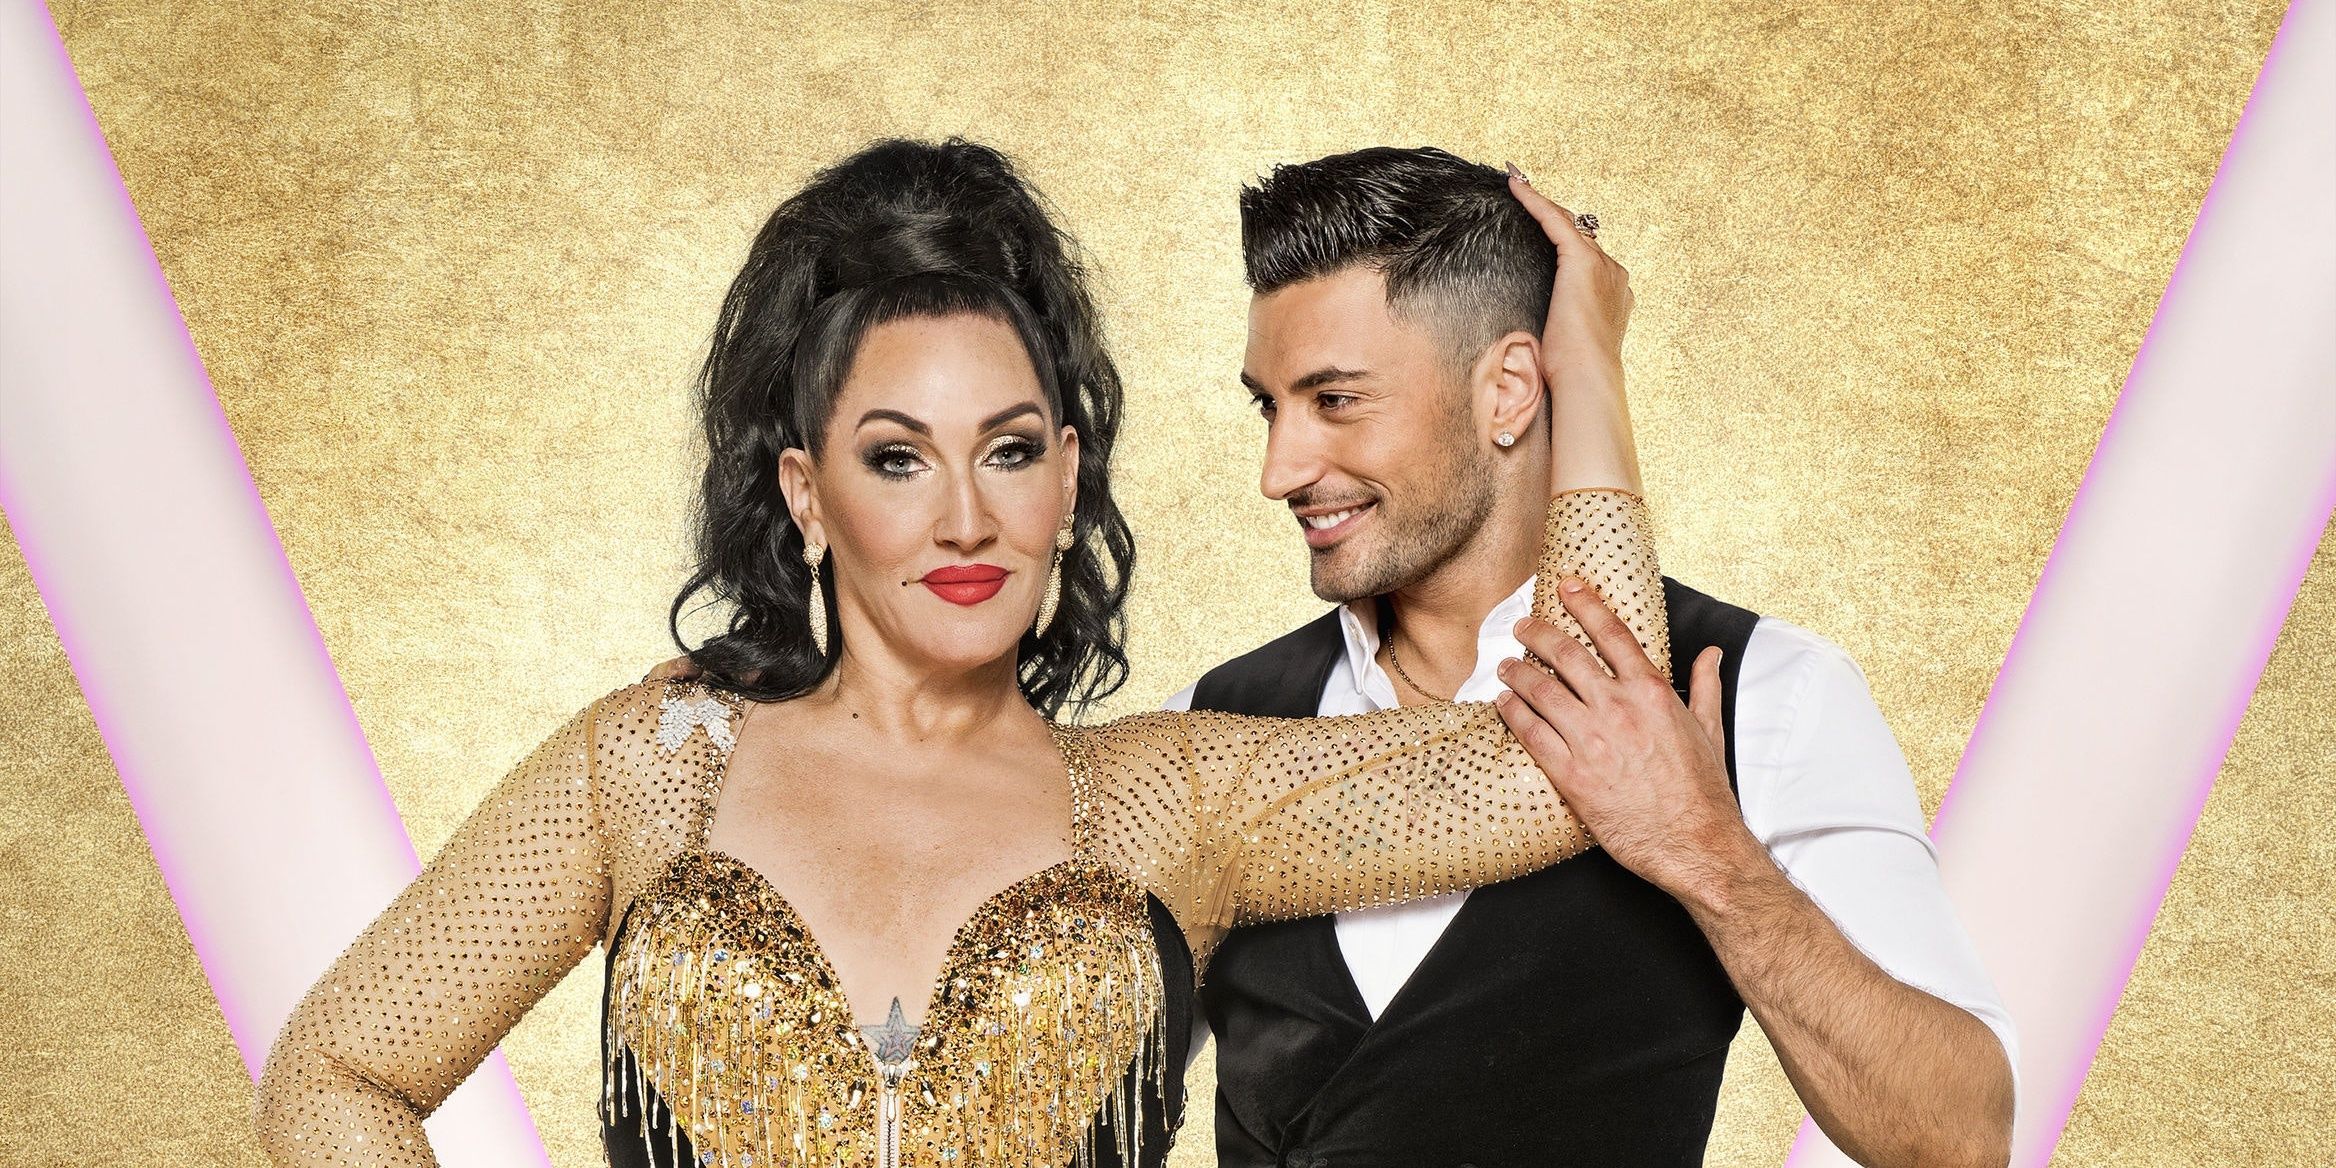 Michelle Visage poses with her professional dance partner in a promo image for Strictly Come Dancing